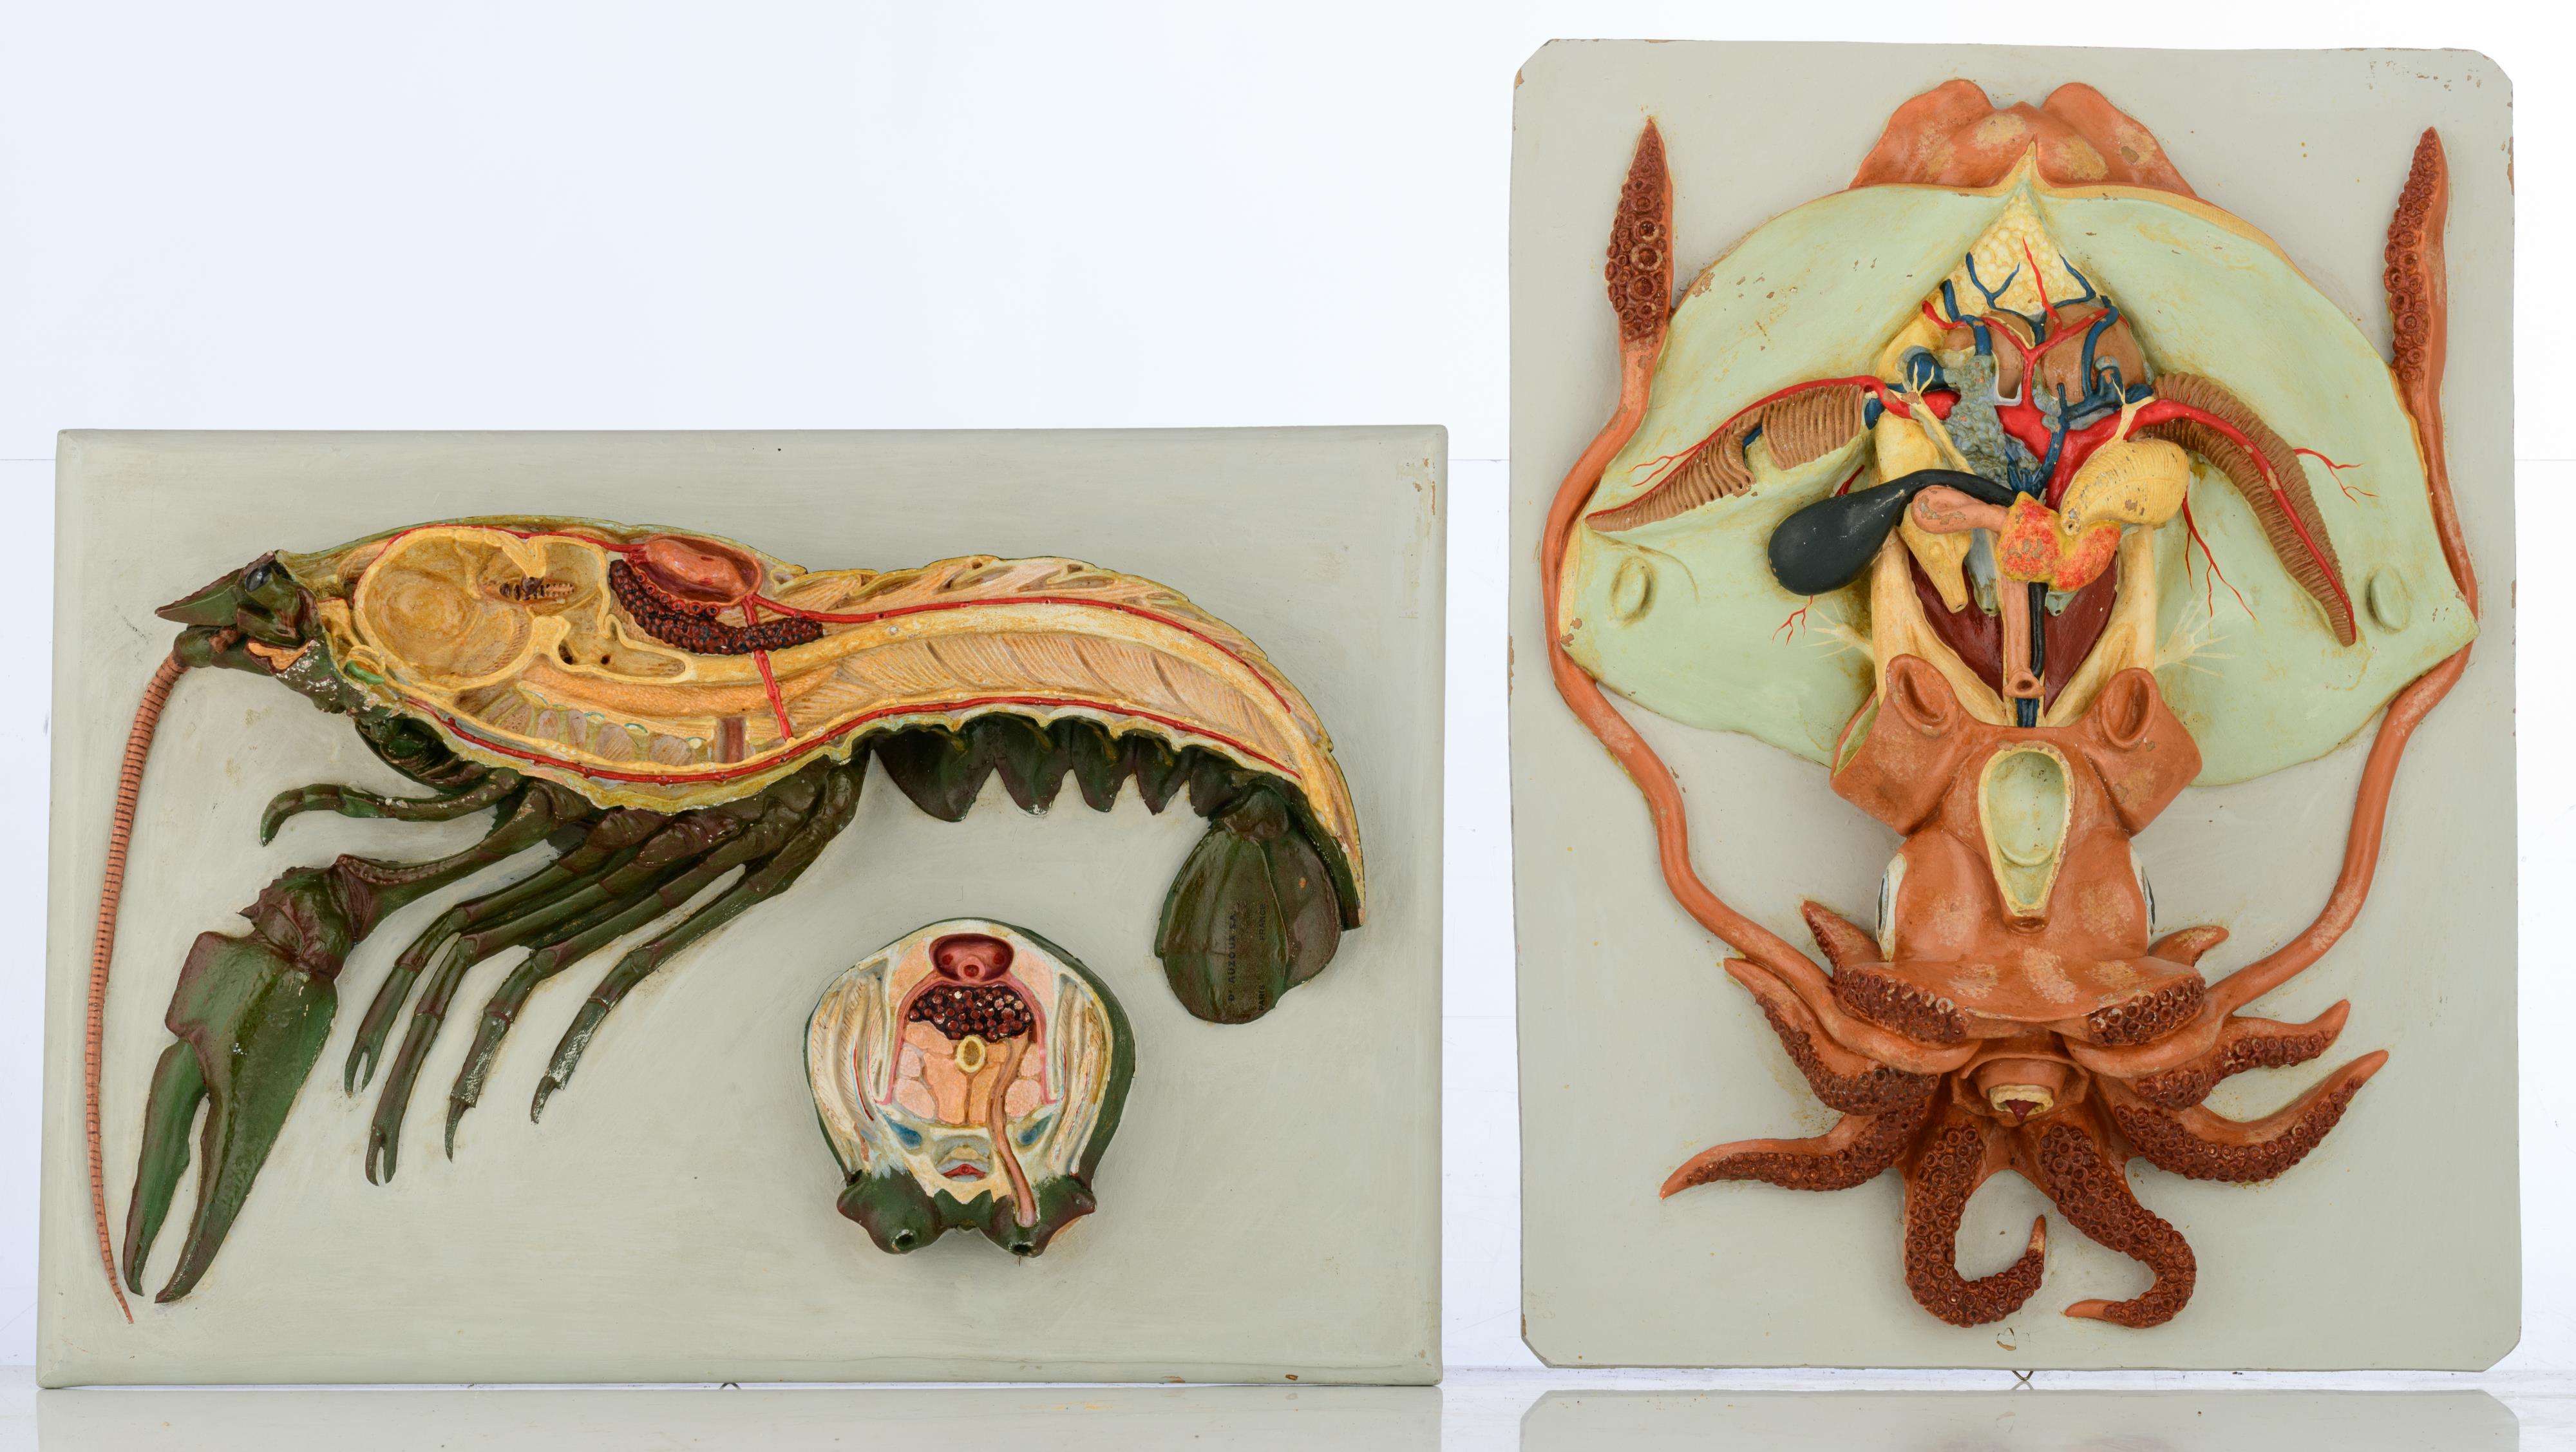 A collection of three anatomical models of nautical animals by Auzoux and one matching piece of a sq - Image 2 of 7